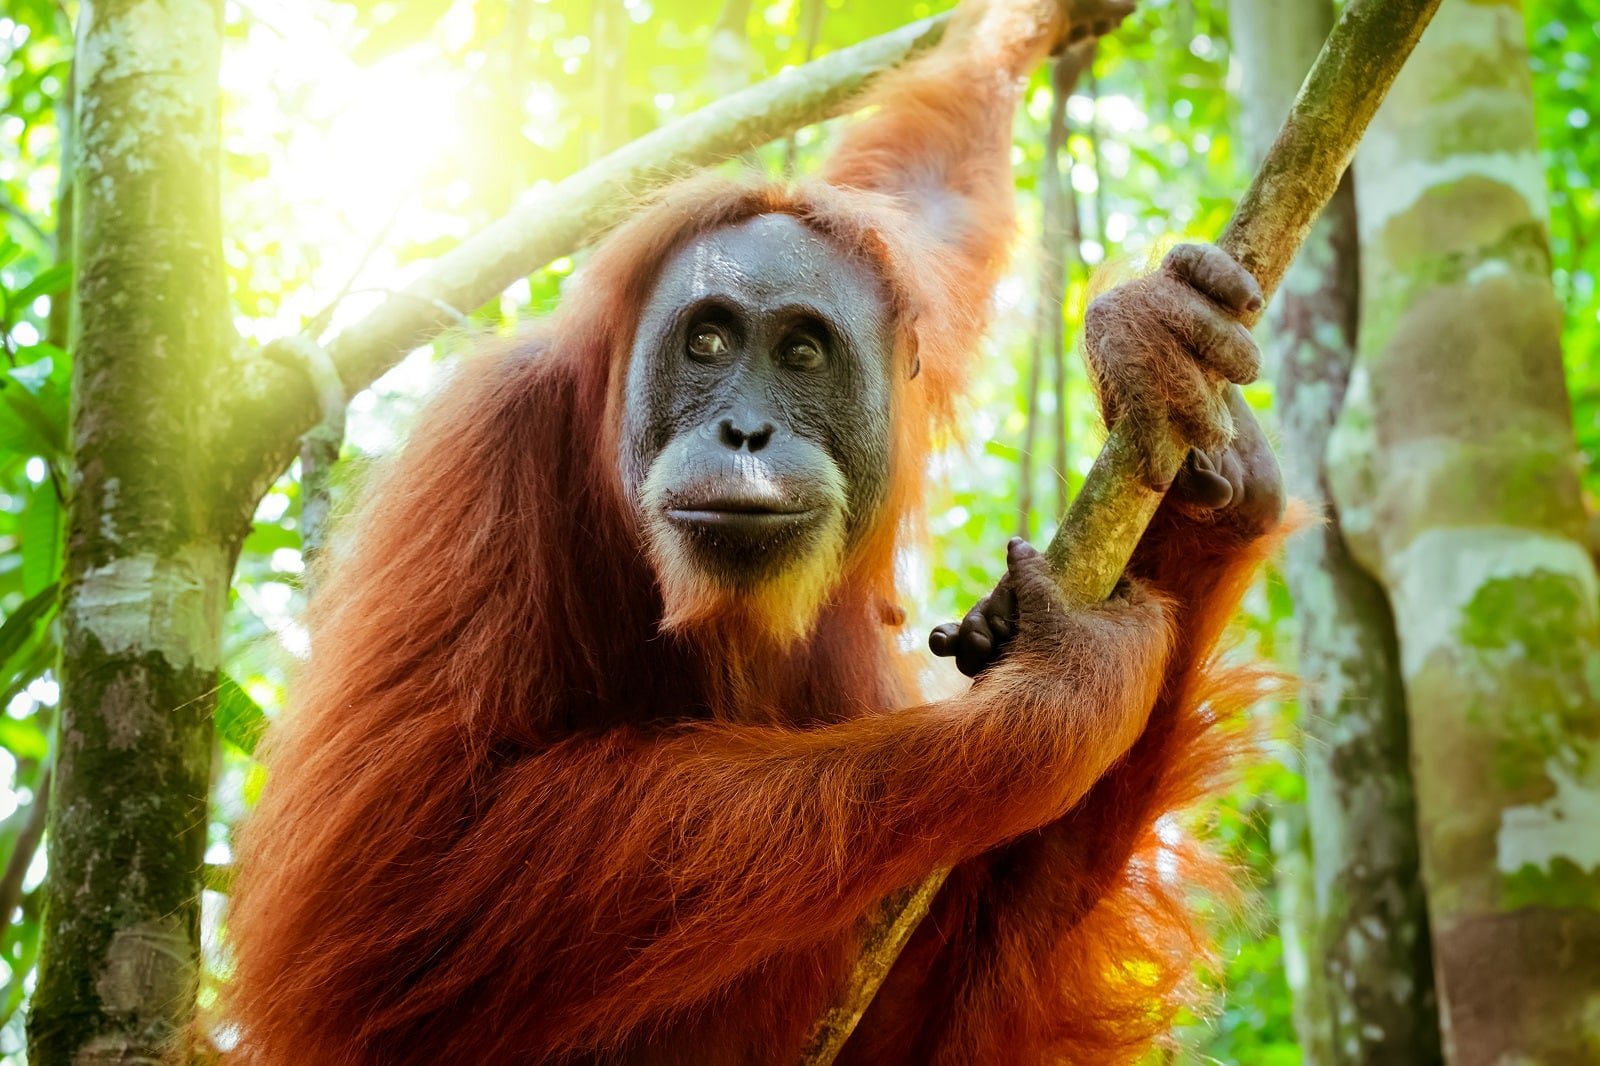 <p><span>Borneo’s dense rainforests are one of the last remaining natural habitats for the endangered orangutans. Observing these fascinating primates in the wild is a unique and moving experience. It’s important to maintain a respectful distance and follow all guidelines provided by sanctuaries or guides. The Sepilok Orangutan Rehabilitation Centre in Sabah is one of the best places to see orangutans in a semi-wild environment while learning about conservation efforts.</span></p> <p><b>Insider’s Tip: </b><span>Visit the Sepilok Orangutan Rehabilitation Centre to see rehabilitated orangutans up close in a responsible setting.</span></p> <p><b>When To Travel: </b><span>March to October for drier weather, making it easier to spot wildlife.</span></p> <p><b>How To Get There: </b><span>Fly into Kota Kinabalu or Sandakan and travel to orangutan-watching areas.</span></p>